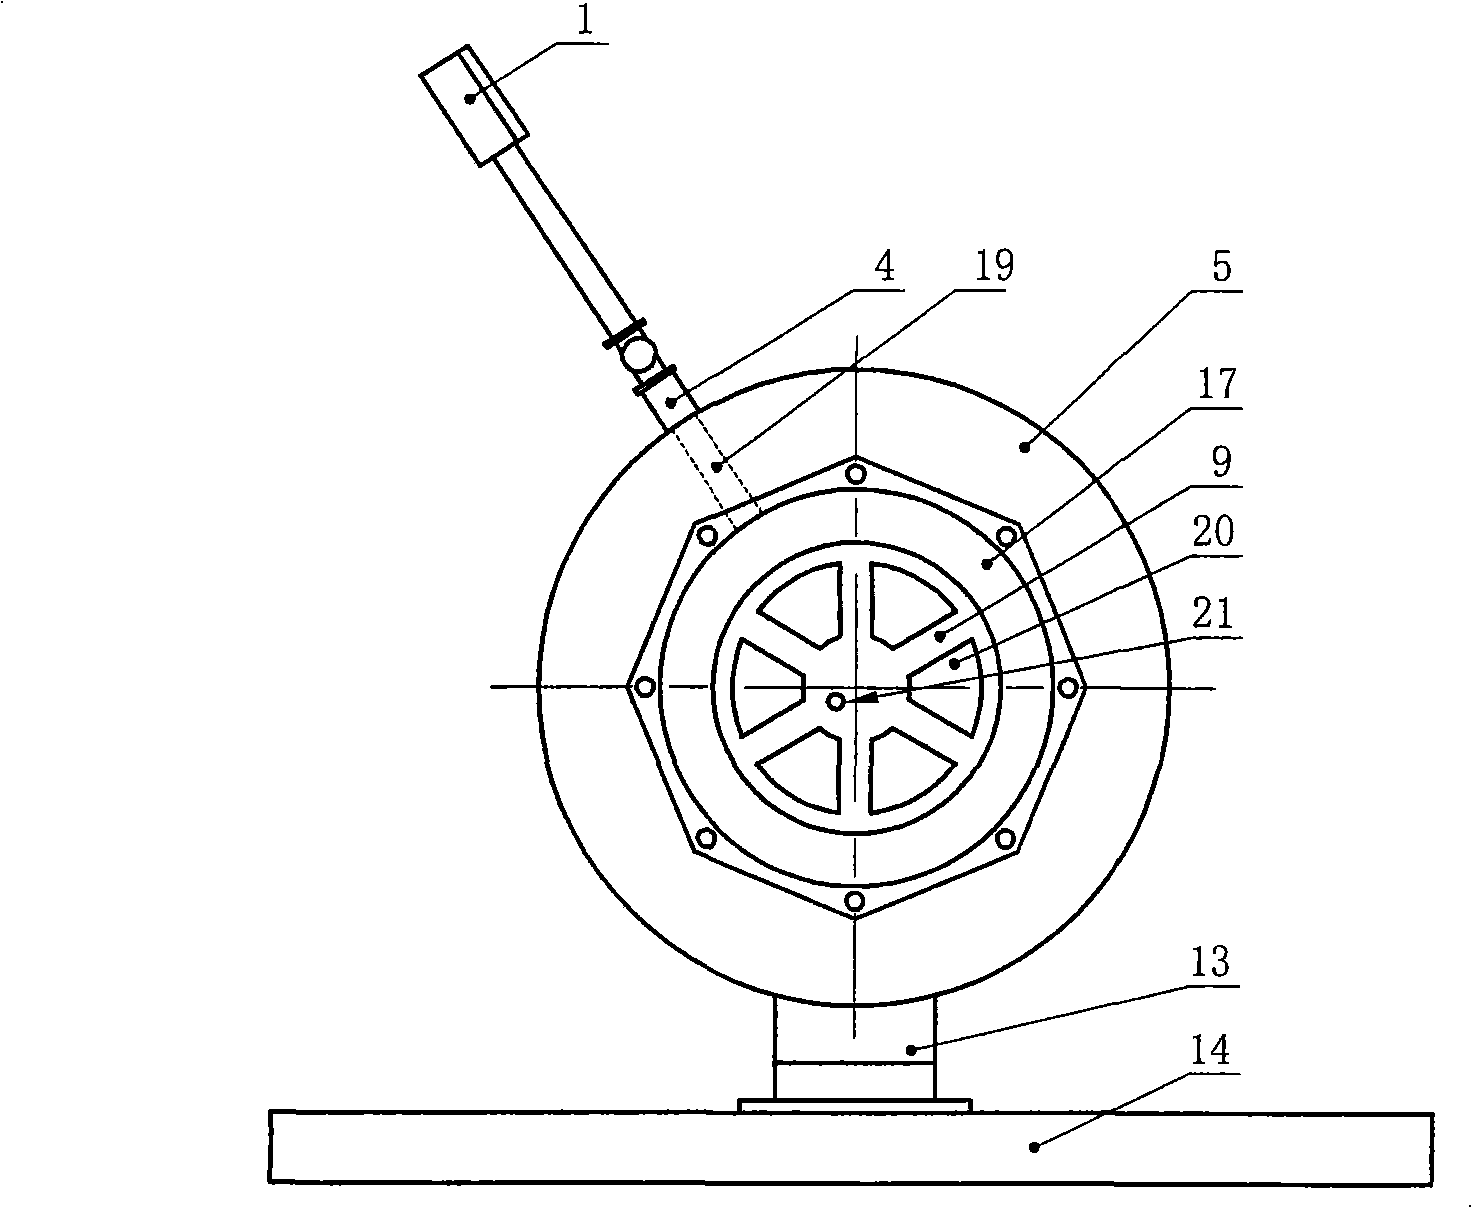 Seal and bulge test device of shell of gas flow meter